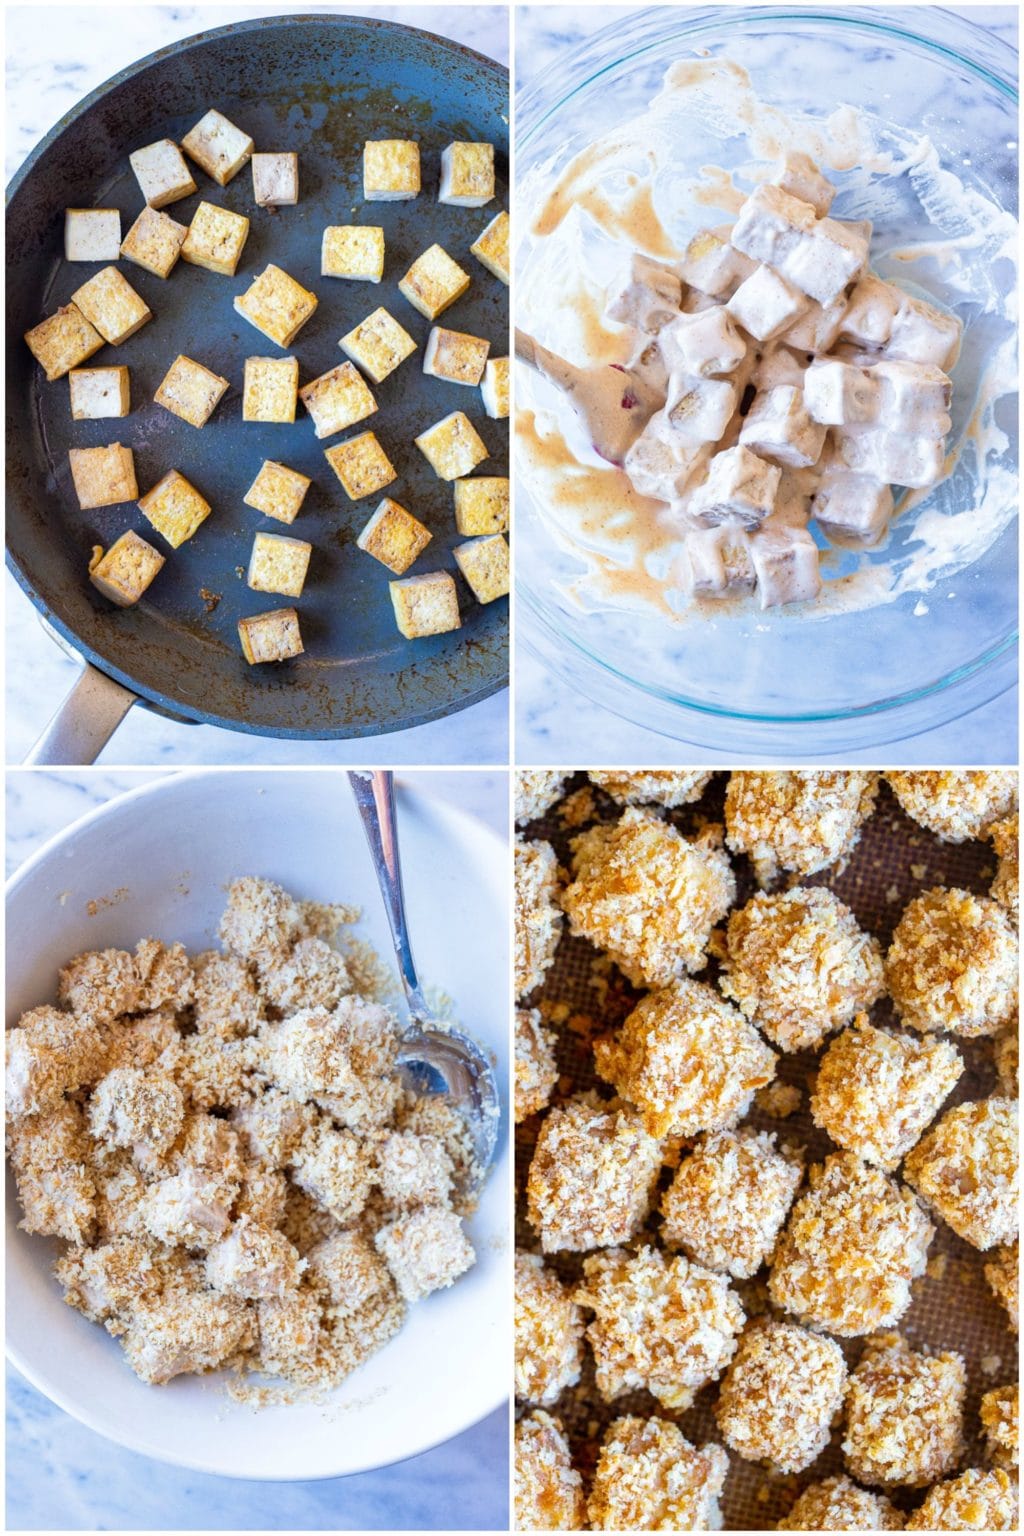 Showing how to make crispy tofu nuggets in four easy steps